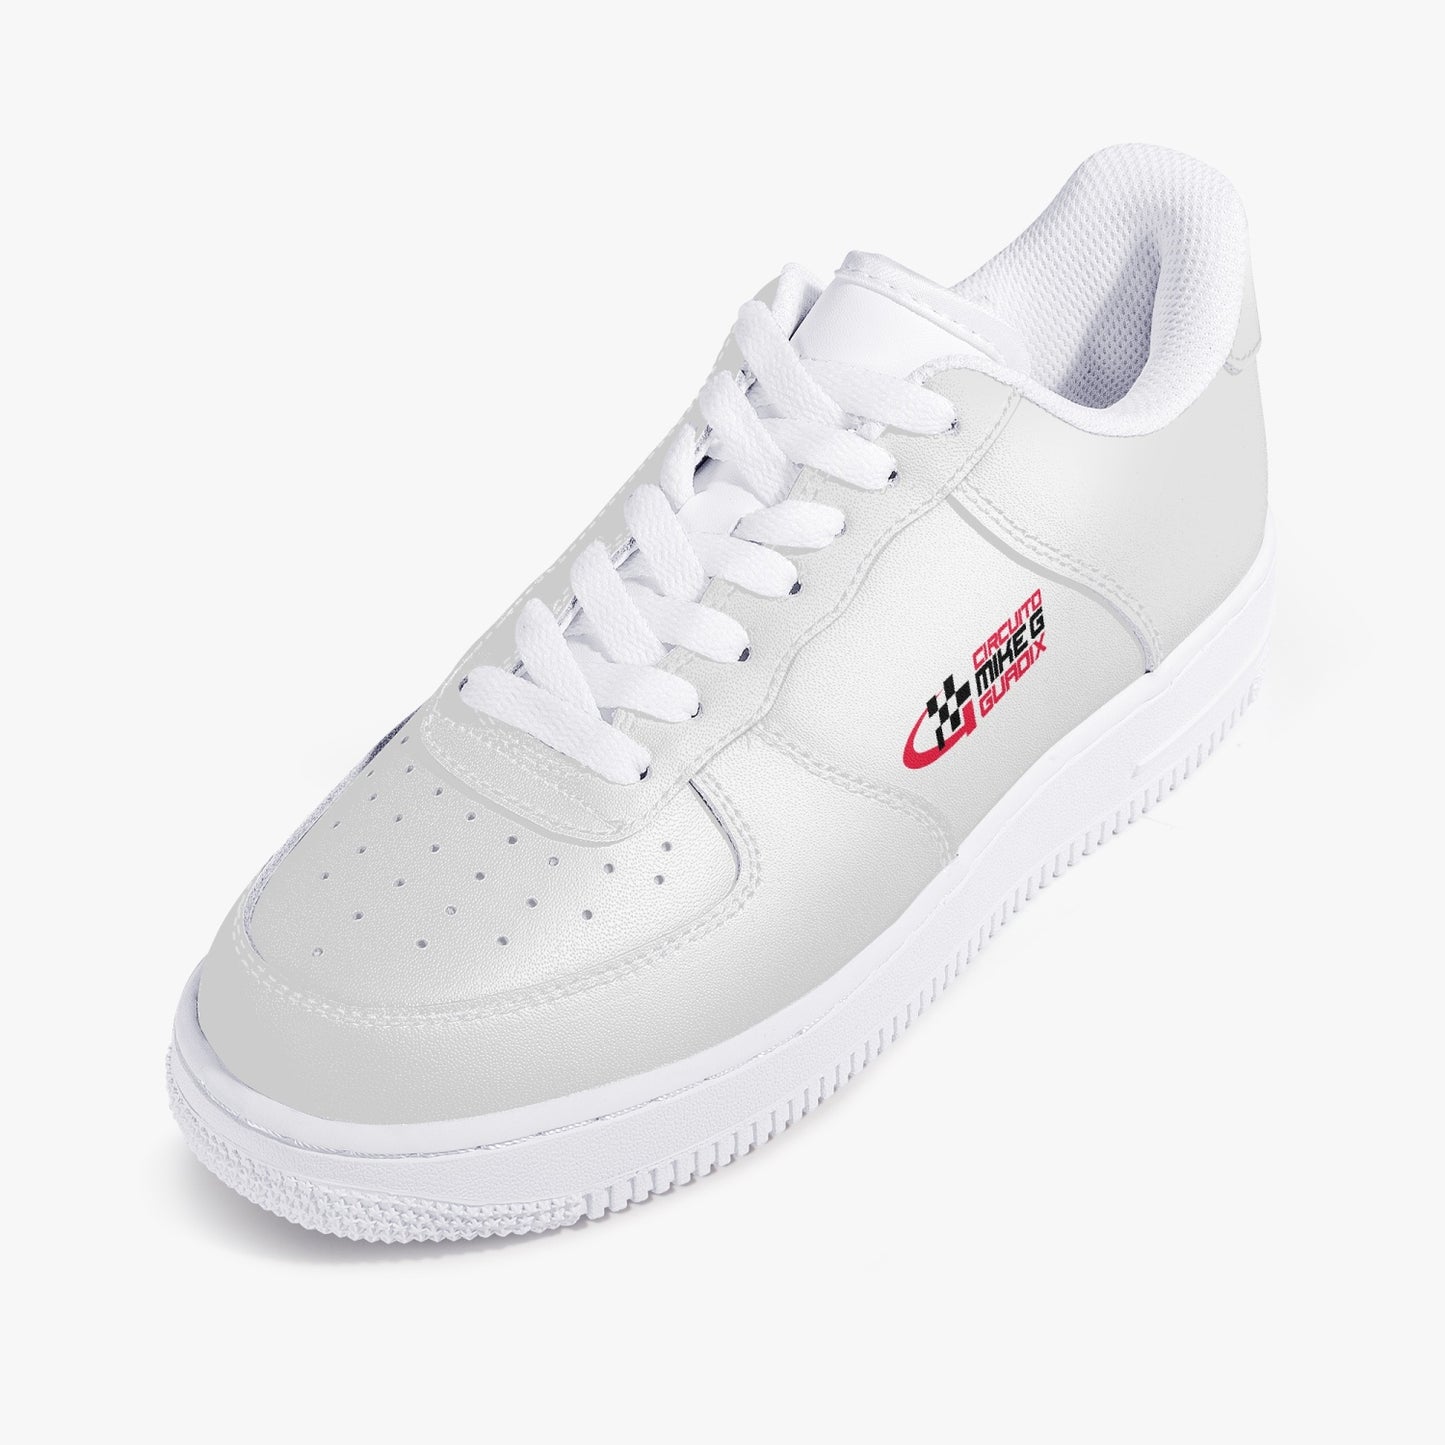 CIRCUITO MIKE G GUADIX Low-Top Leather sneakers - full circuit white